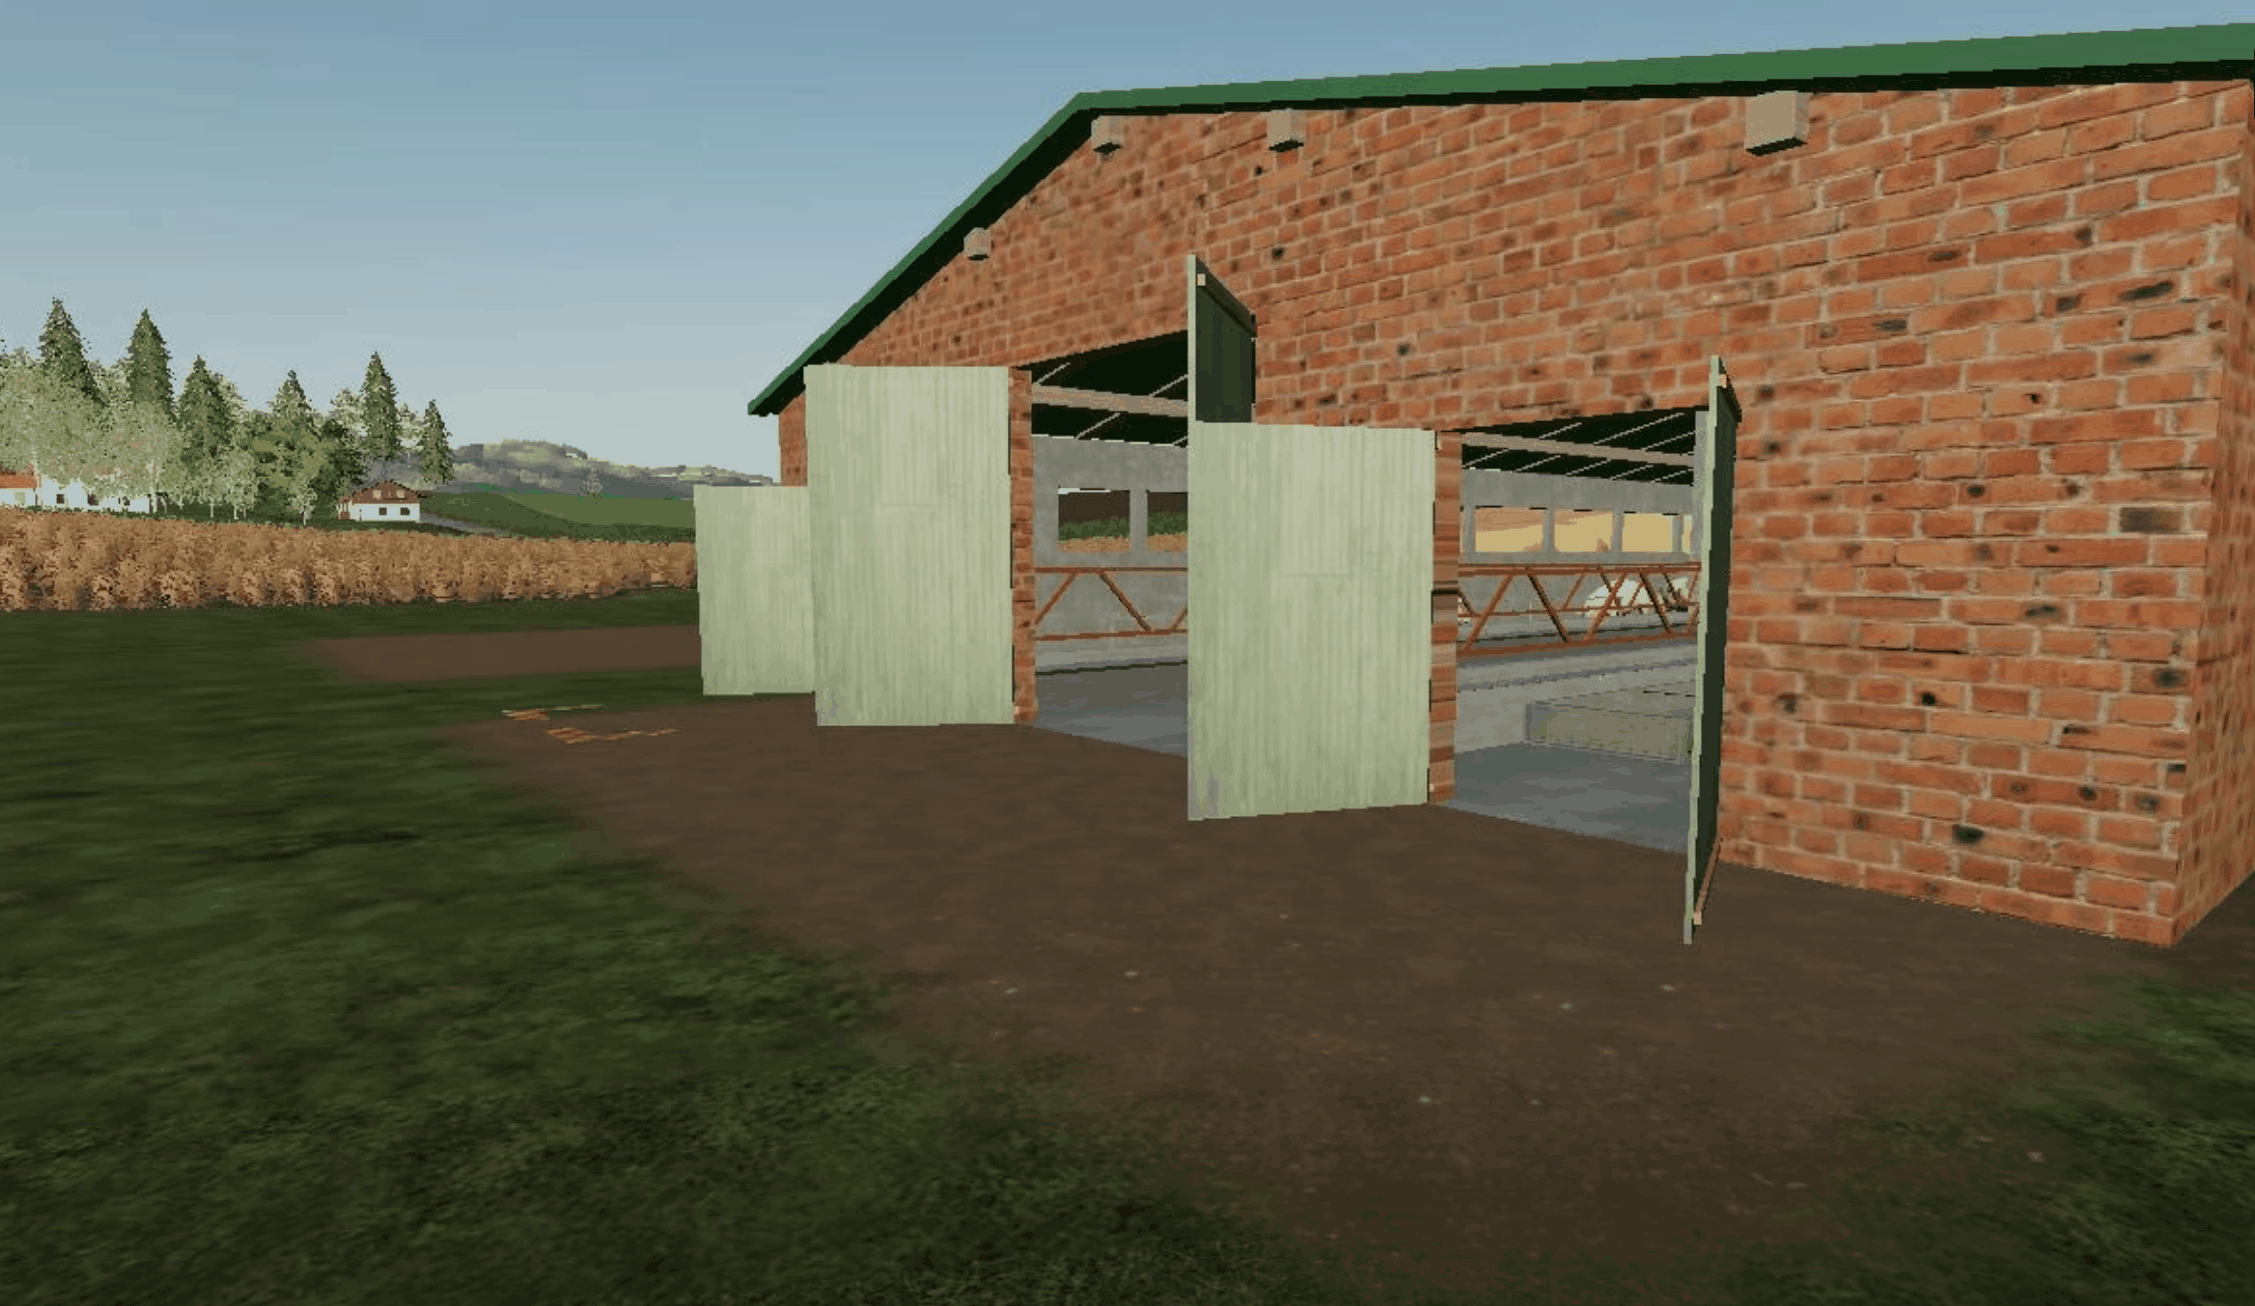 FS19 Old Small Pig Stable v1.0.0.0.